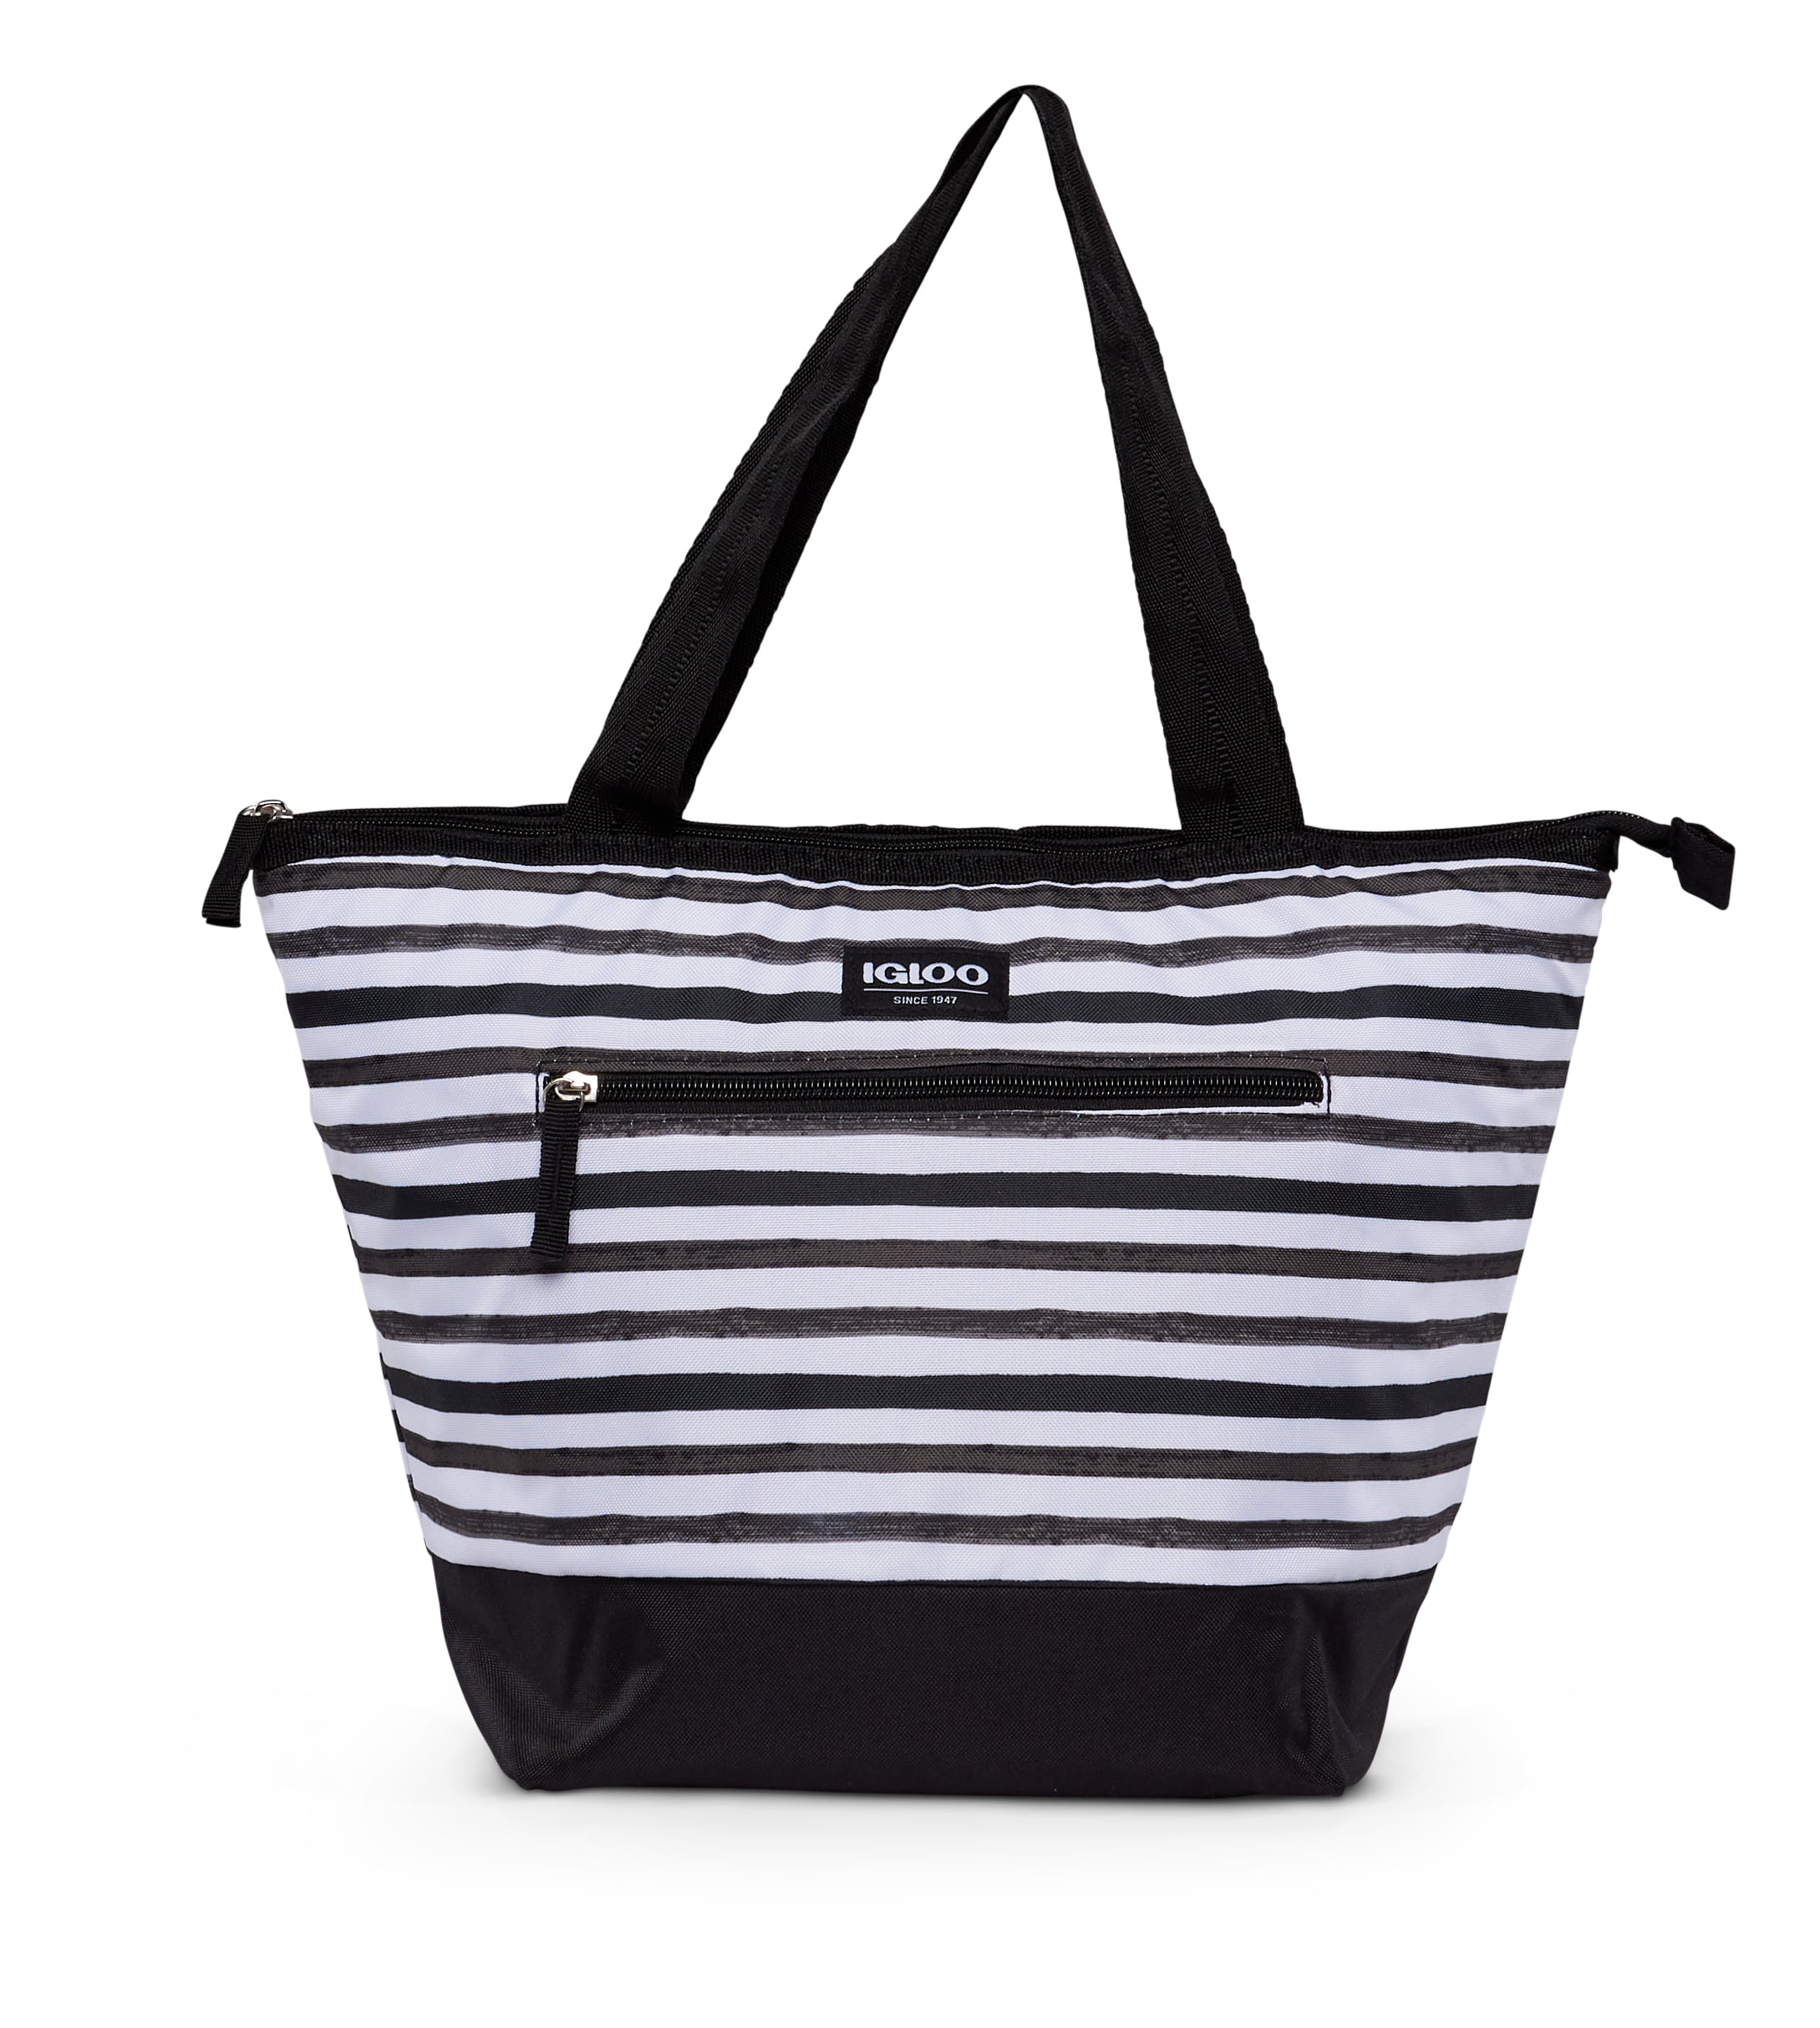 Igloo lunch box Essential Tote Black & white carre  Lunch bag 8 cans 